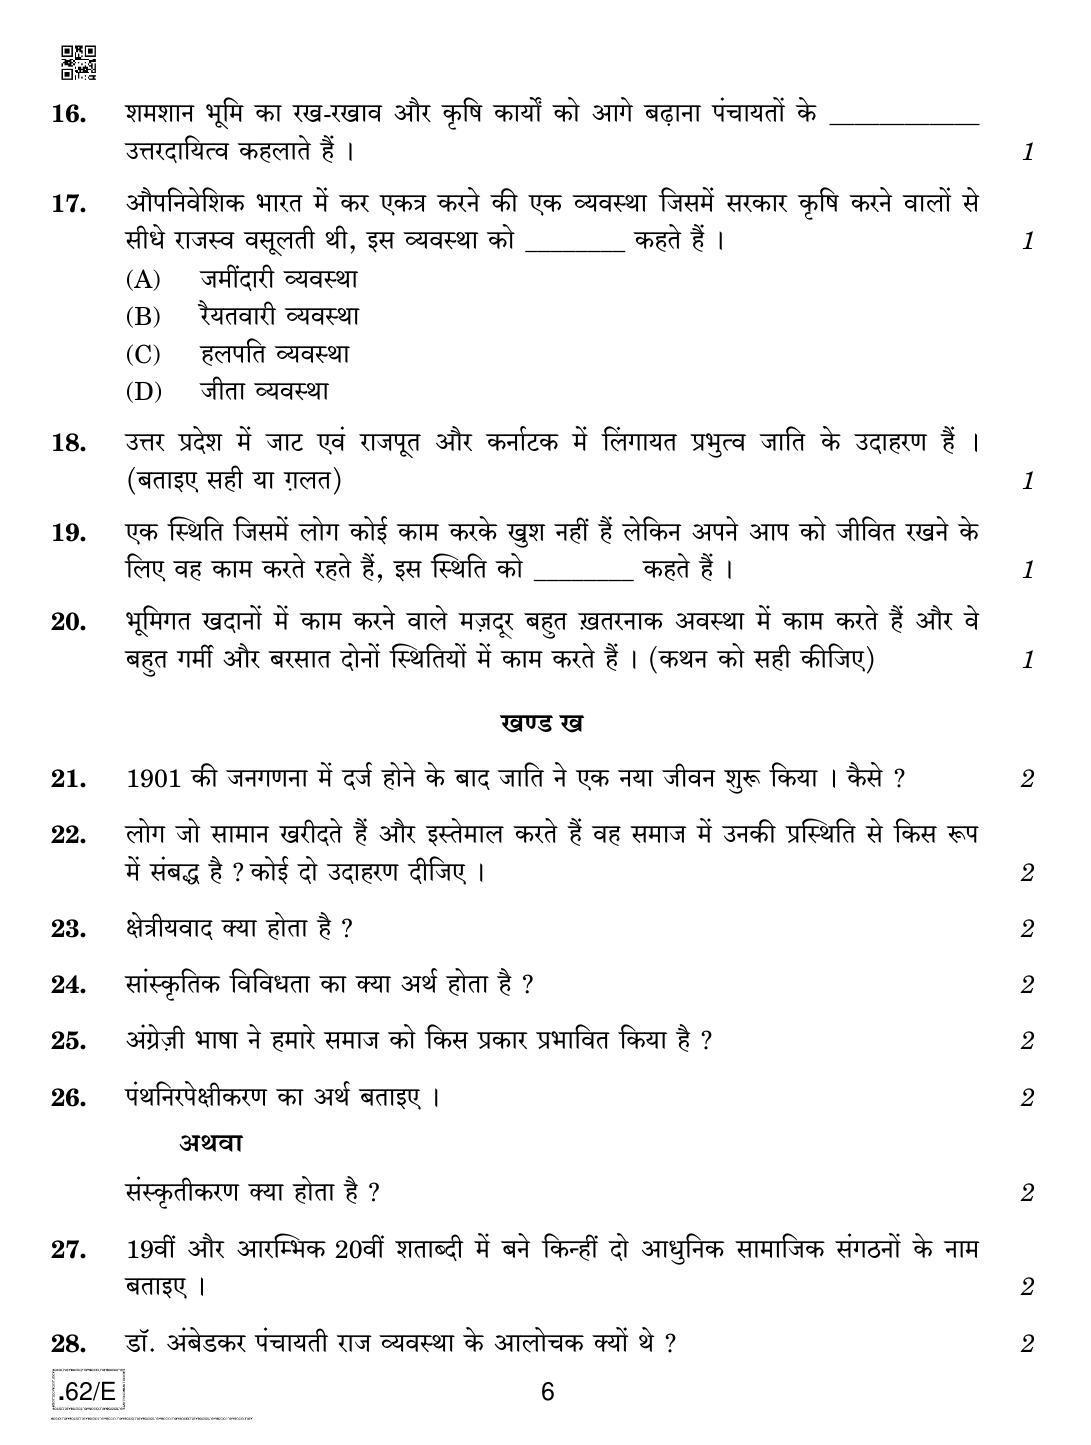 CBSE Class 12 Sociology 2020 Compartment Question Paper - Page 6